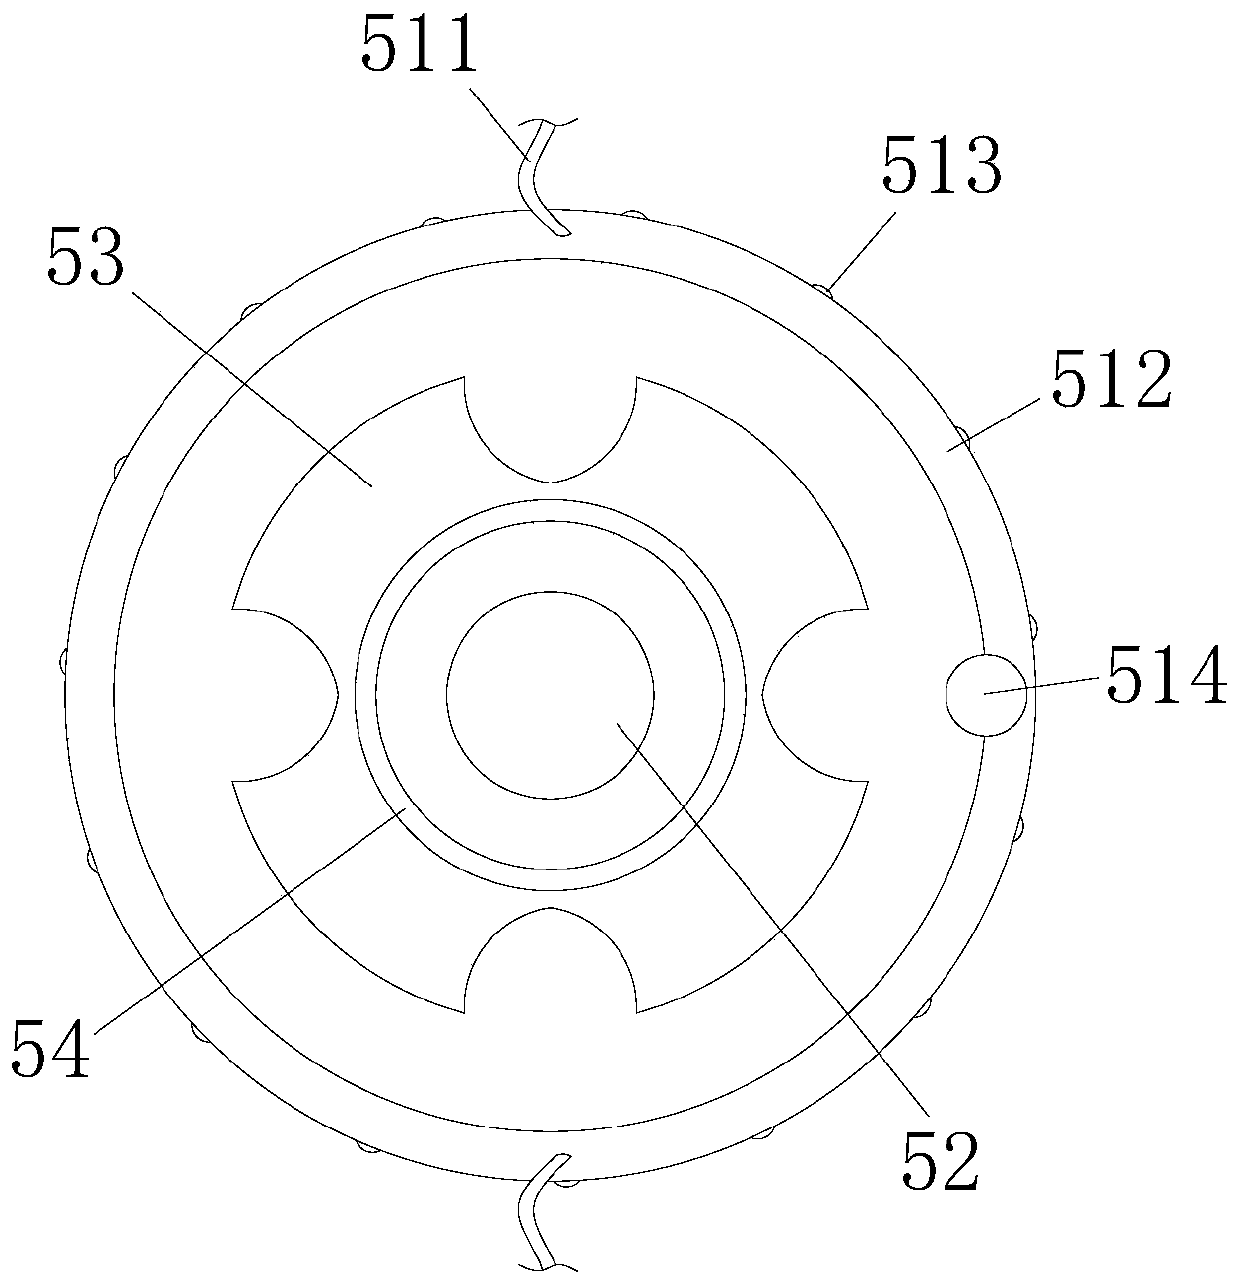 Tow printing and dyeing device for textile processing